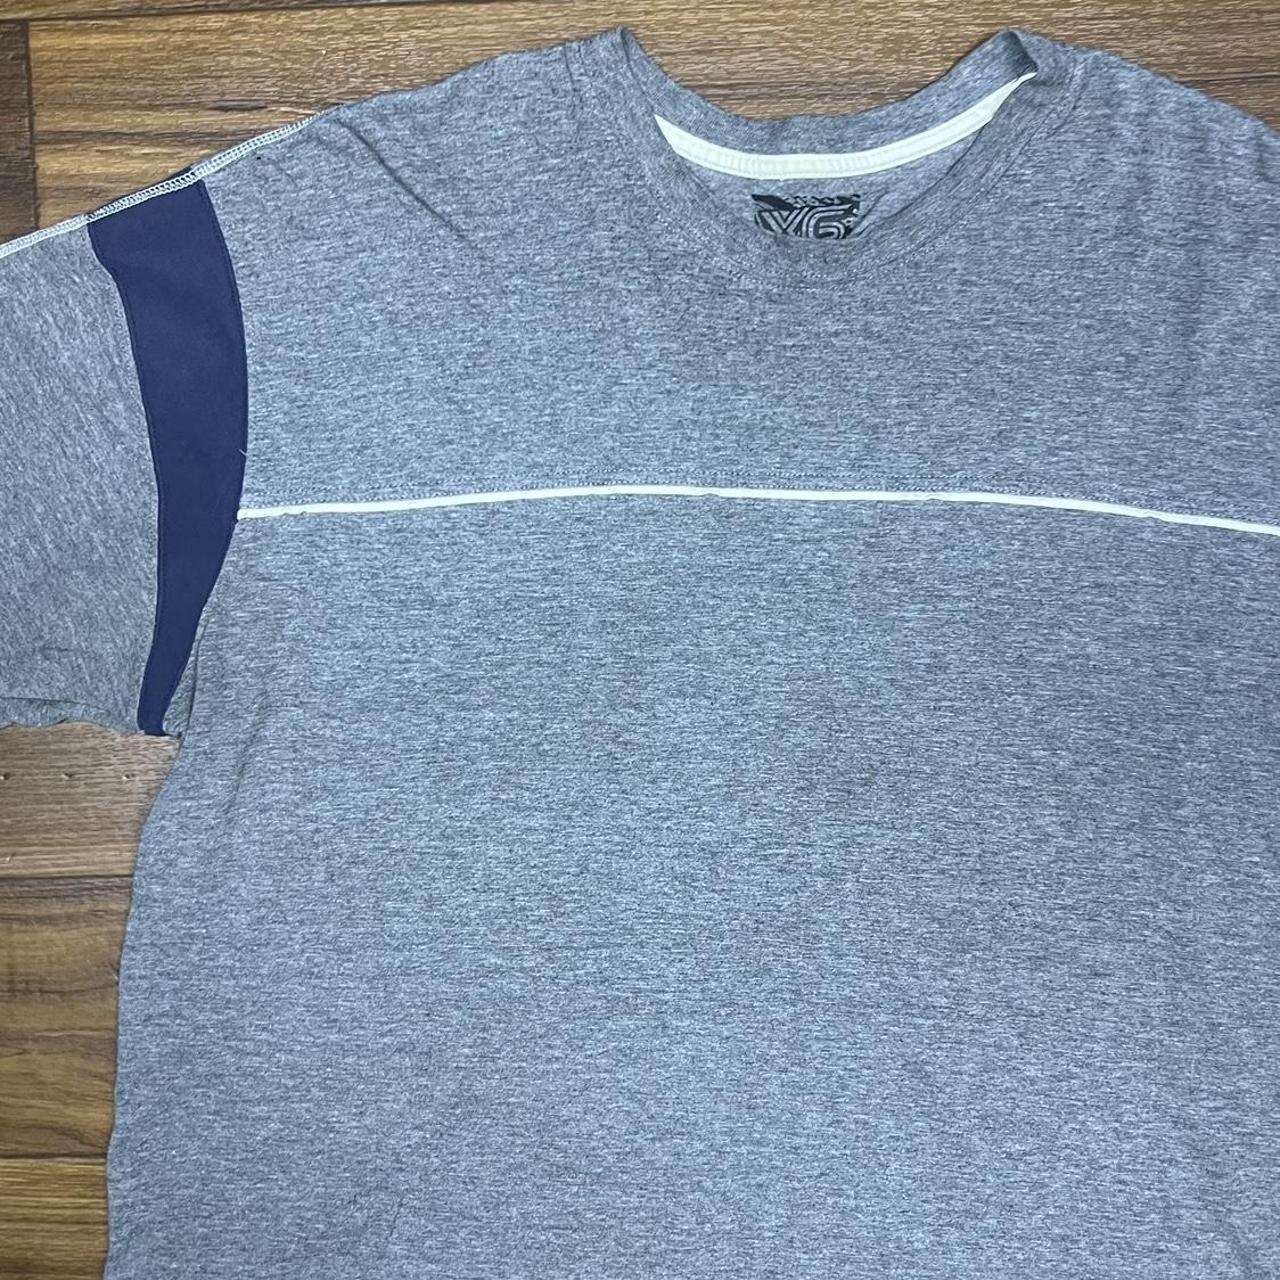 Grey and blue striped vintage t shirt by Xtreme... - Depop